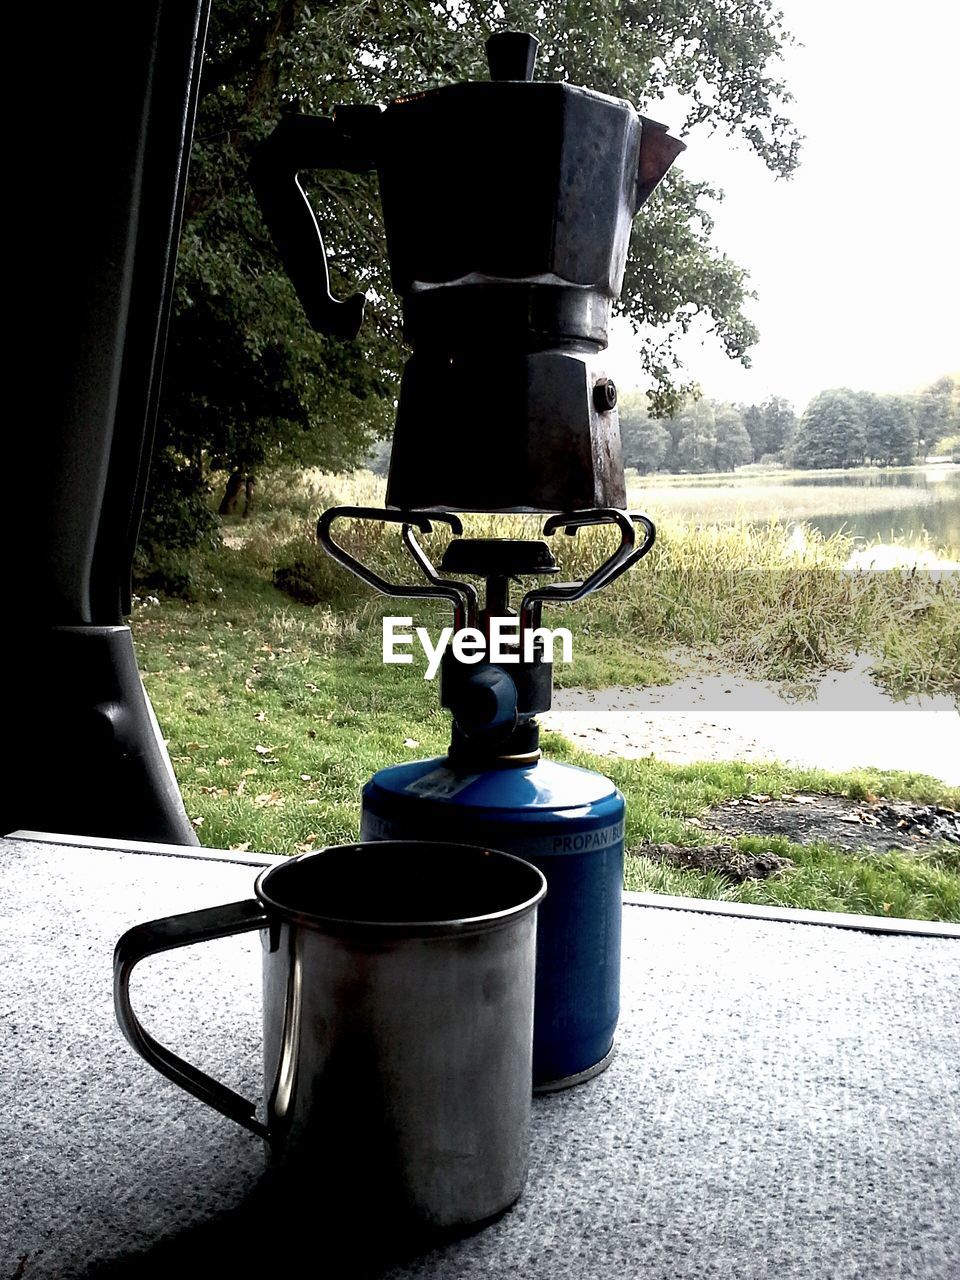 Coffee maker on stove by field